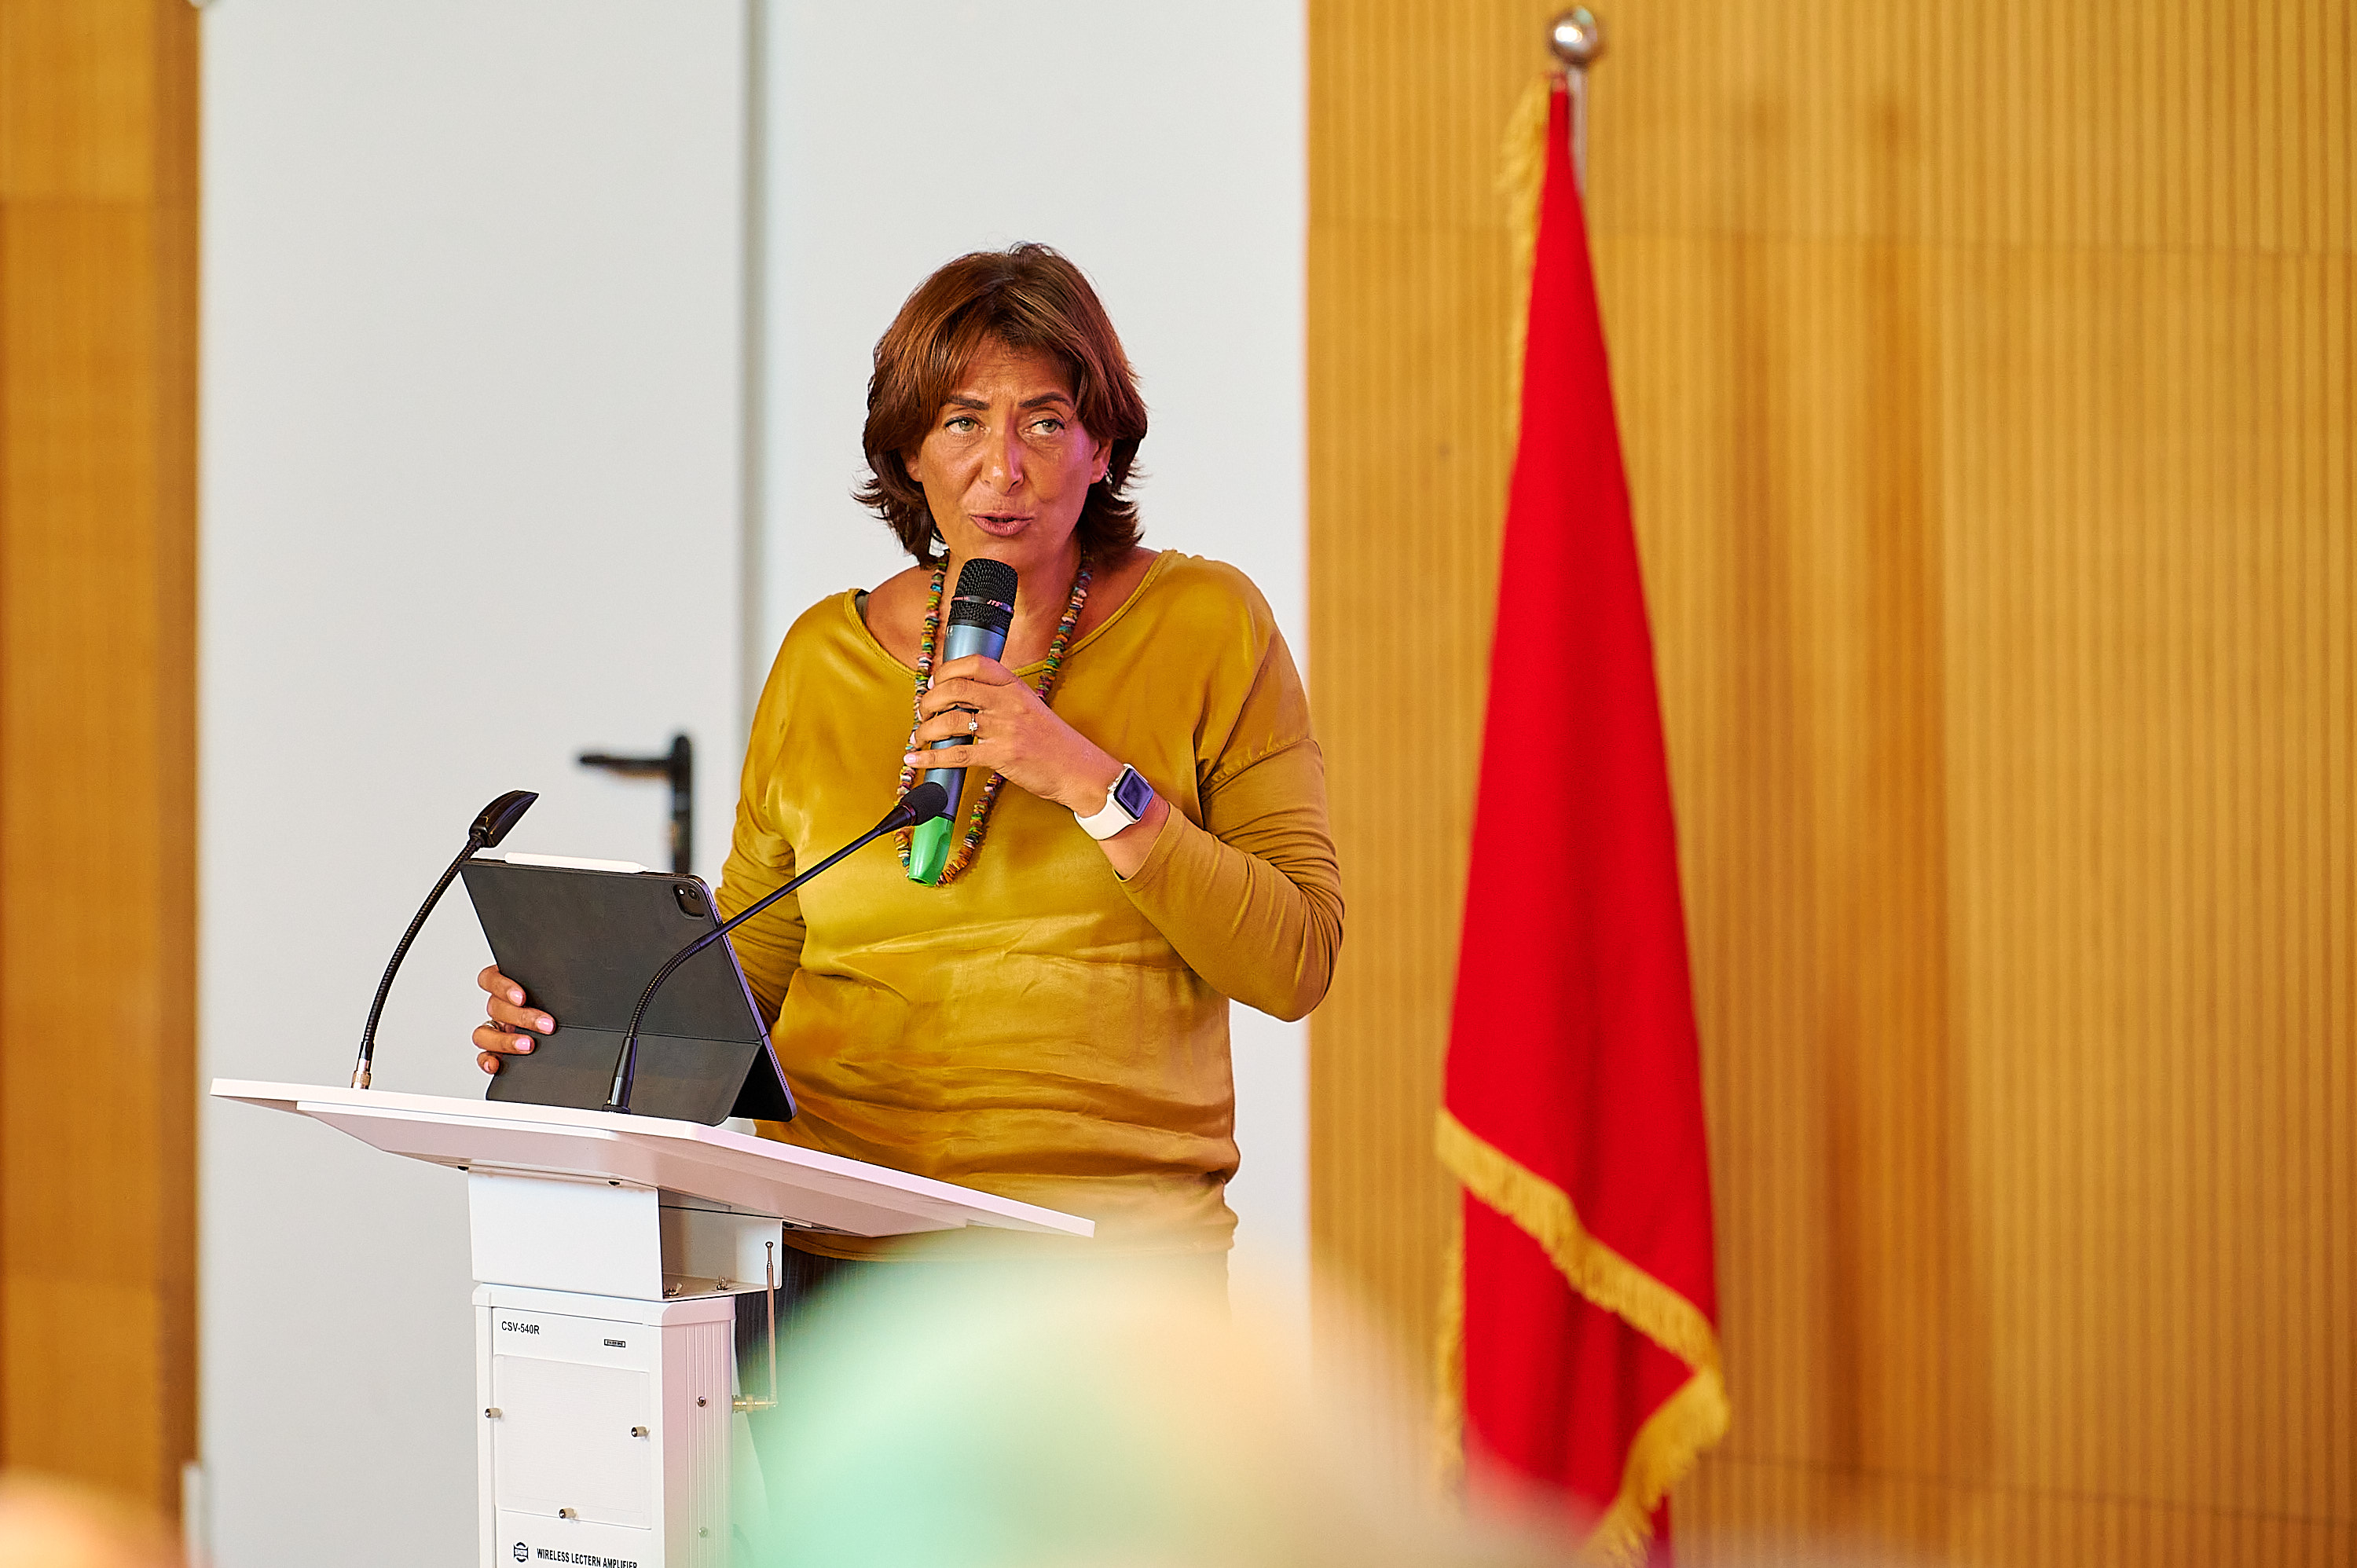 Omnia Aboukorah-Voigt, Director of the Energy and Sustainable Energy Cluster at GIZ Morocco